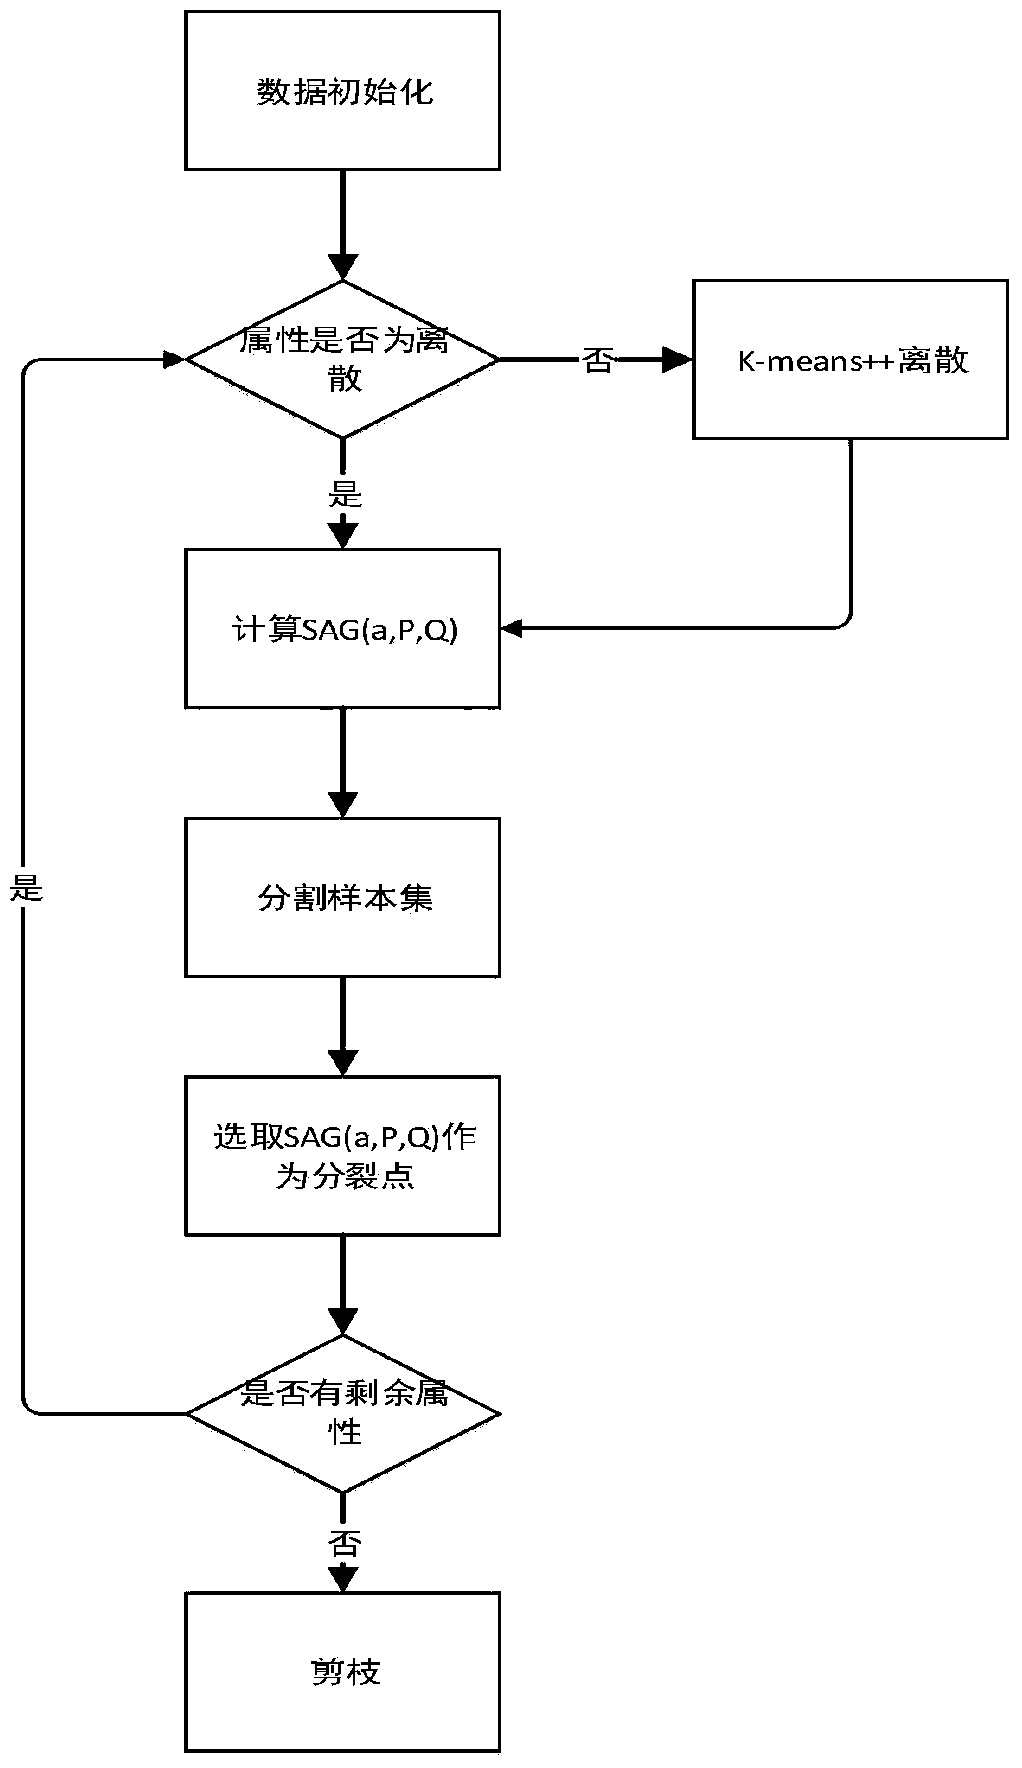 A decision tree generation method based on an ID3 algorithm